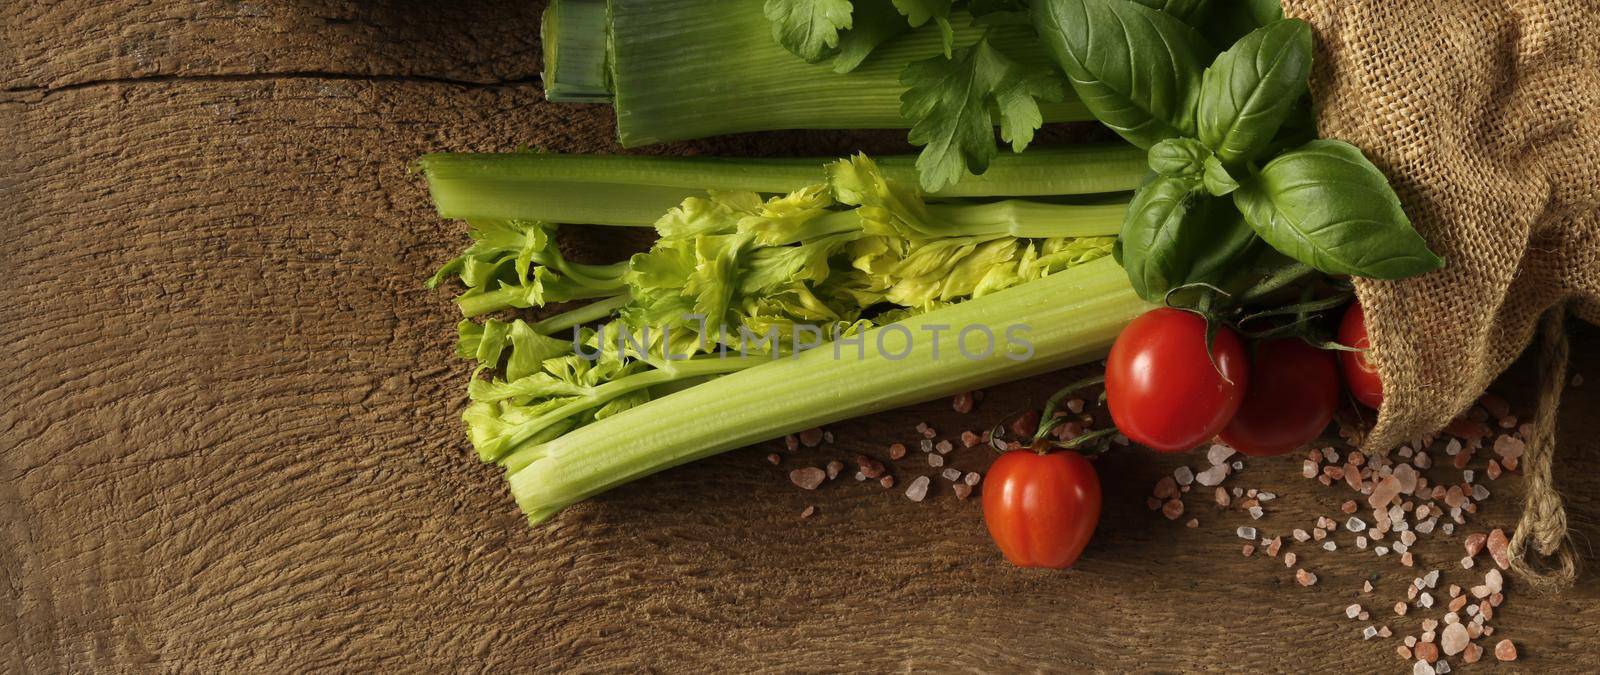 Rustic background with freshly picked vegetables, canvas bag on old wood background. Fresh Tomatoes, basil. Horizontal rustic background